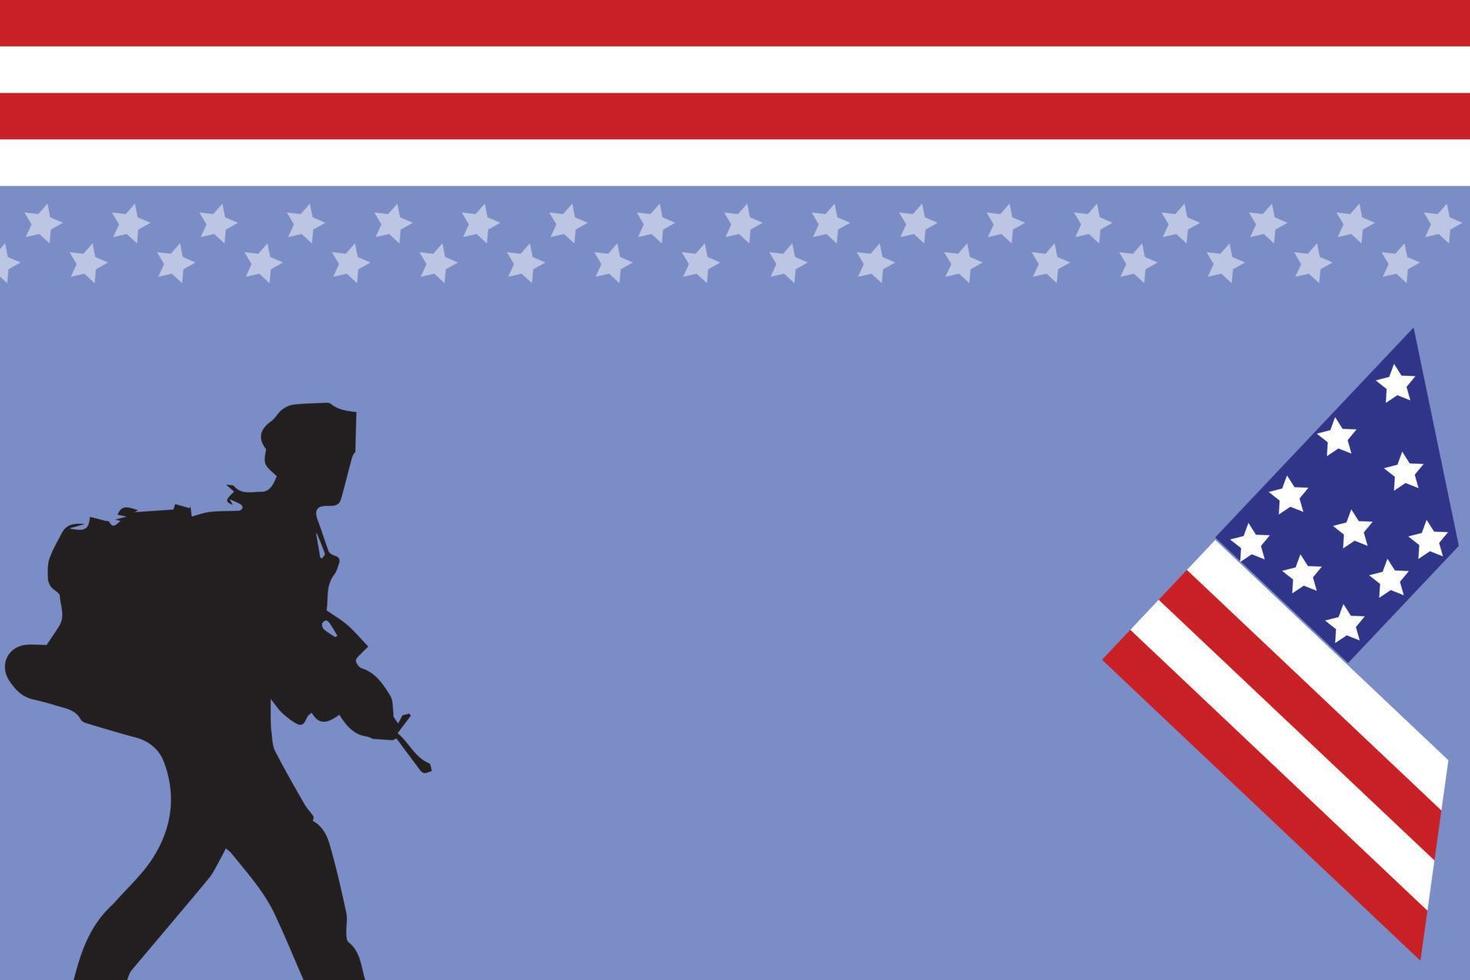 Veterans day copy space.Honoring all who served. Letter V logo with USA flag and soldiers as a symbol of veterans.flag USA design for memorial day background.11th November Happy Veterans Day. vector